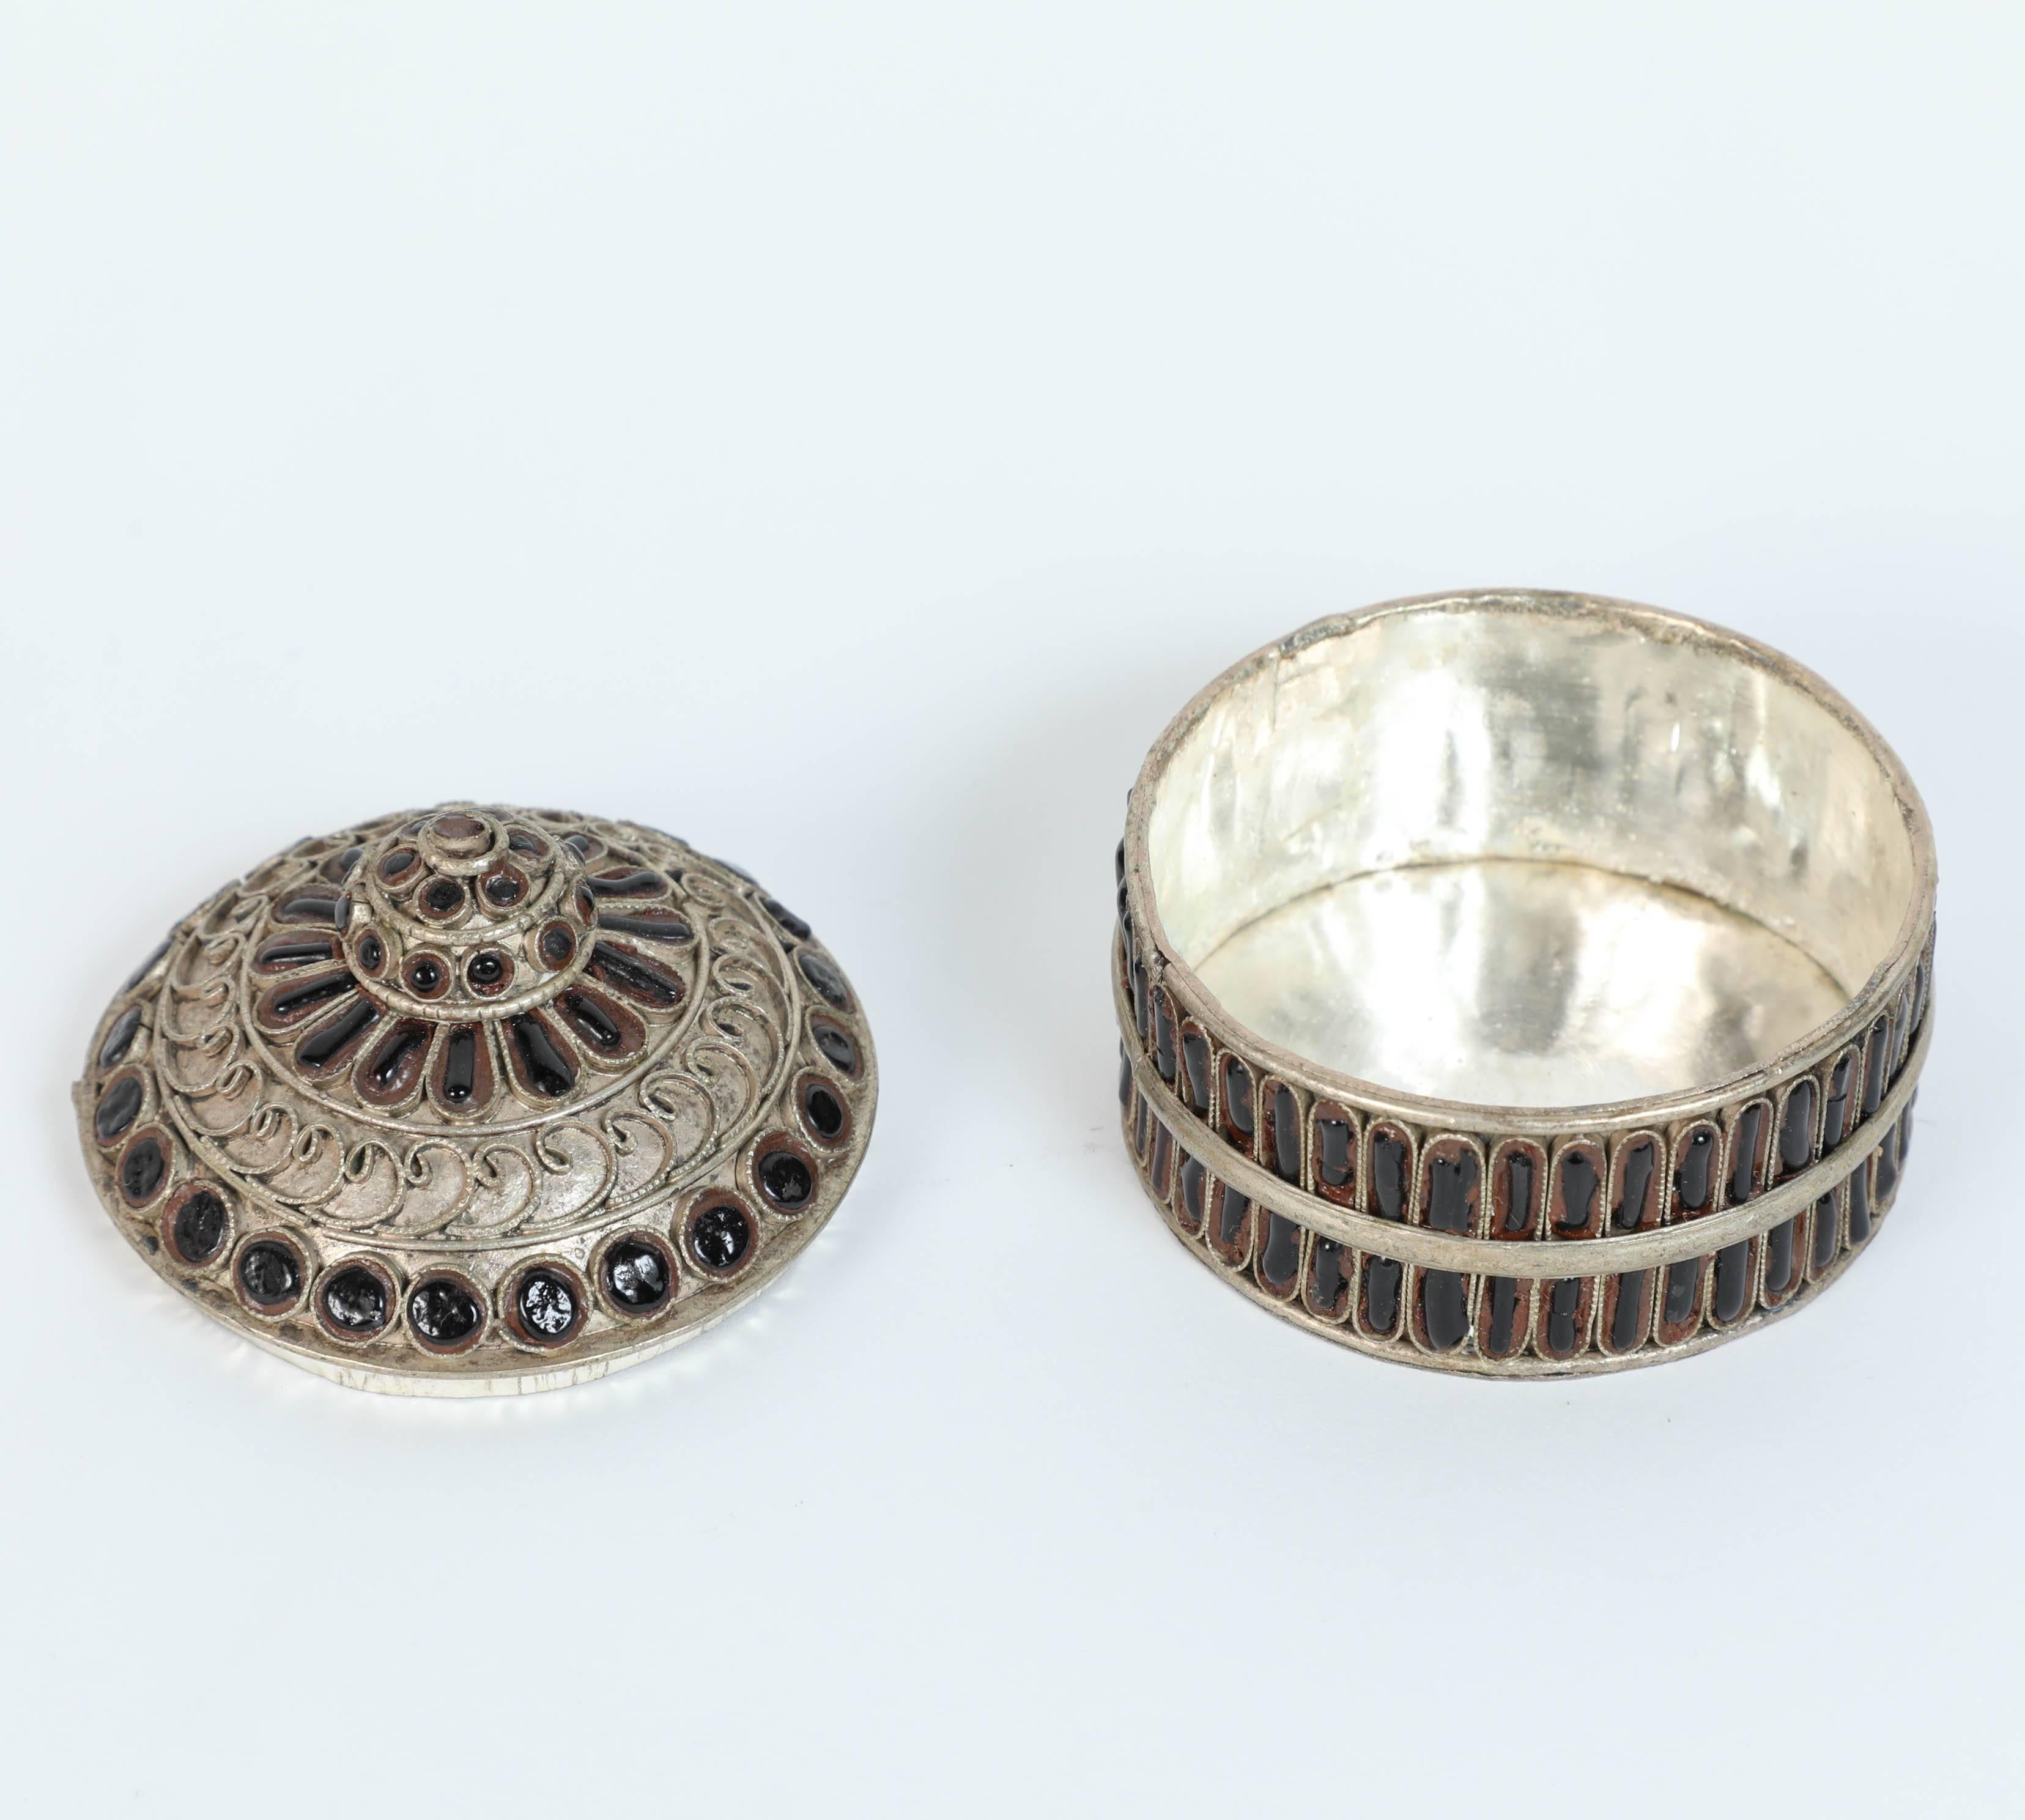 Silvered metal lidded snuff box of a circular form.
Designed into two detached sections, finely handcrafted and decorated with scrollwork designs with black stones inlay and lots of great detail.
Snuff or betel box Taj Mahal Jaipur India.
Size: